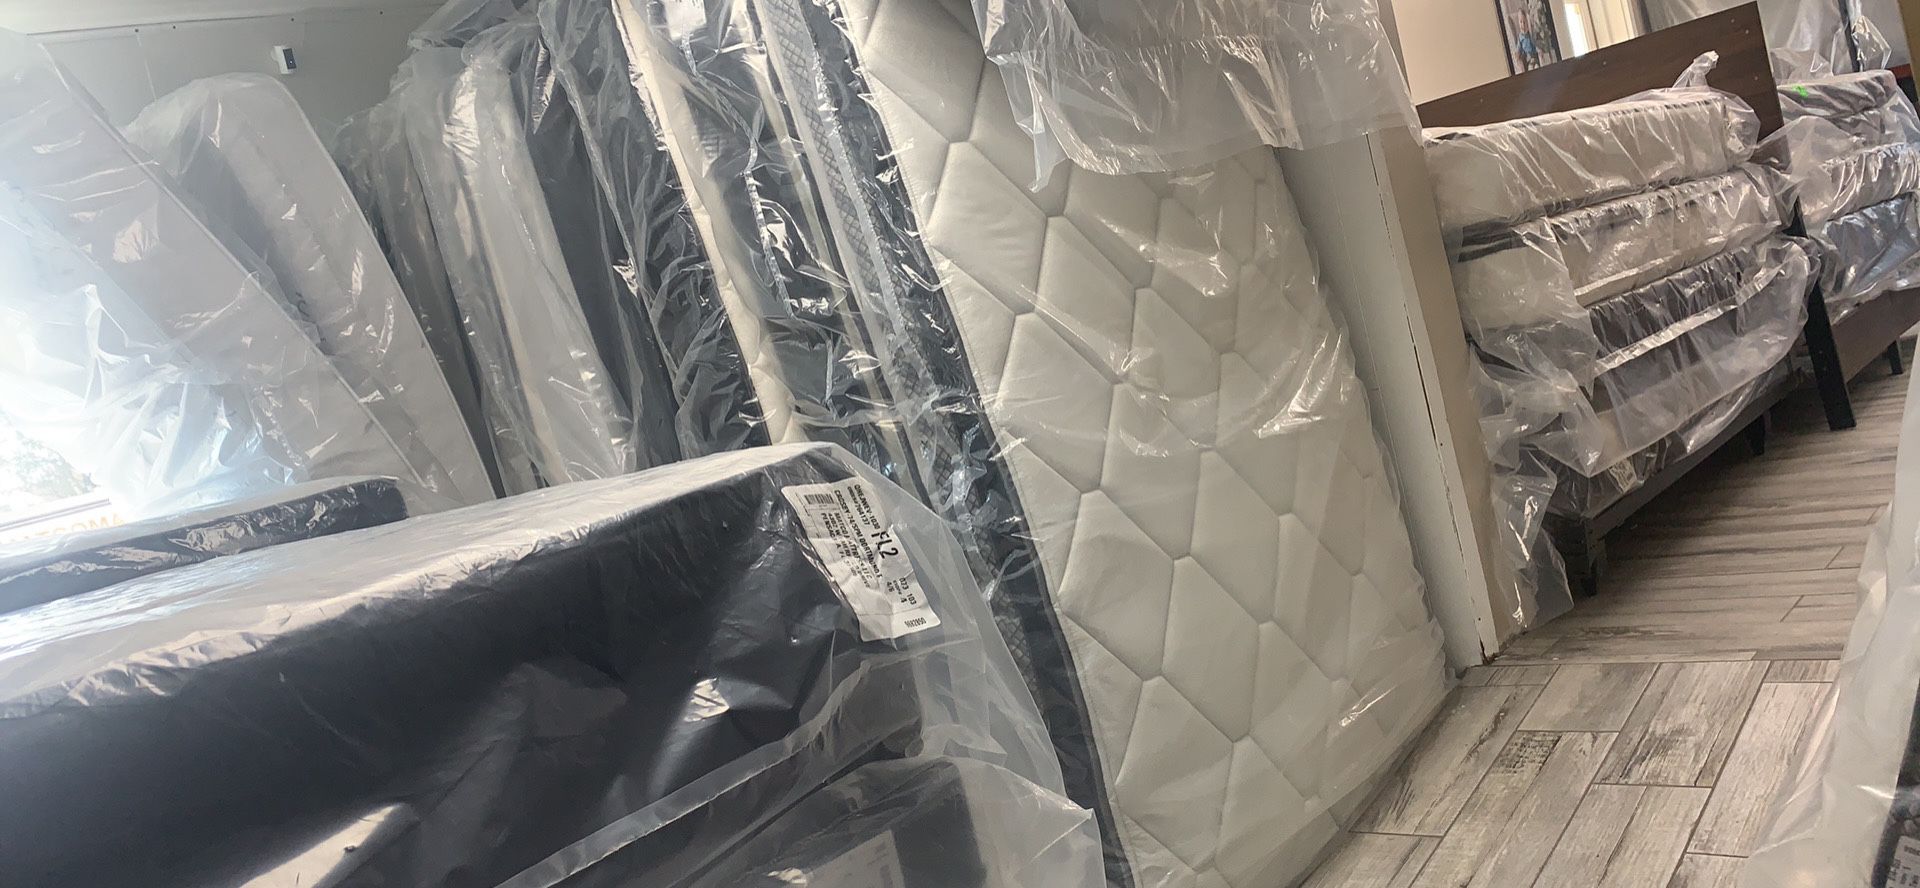 New Mattresses In Stock - 69$ And Up! 